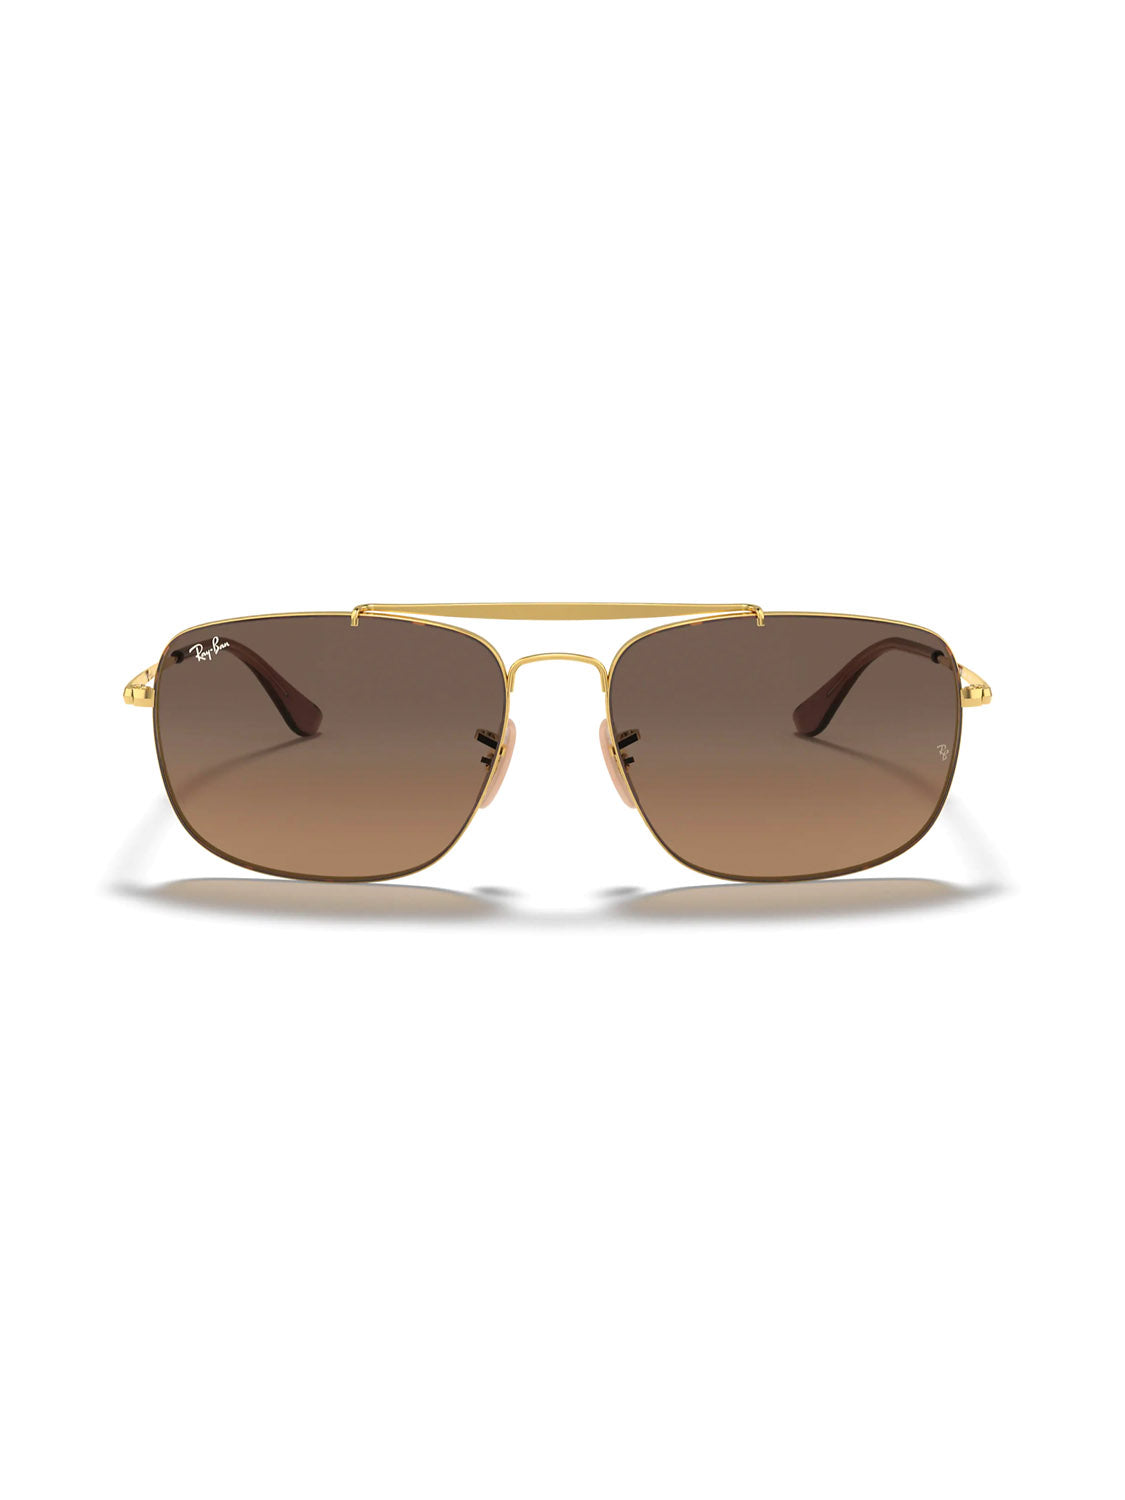 Ray Ban - RB3560 Colonel Sunglasses